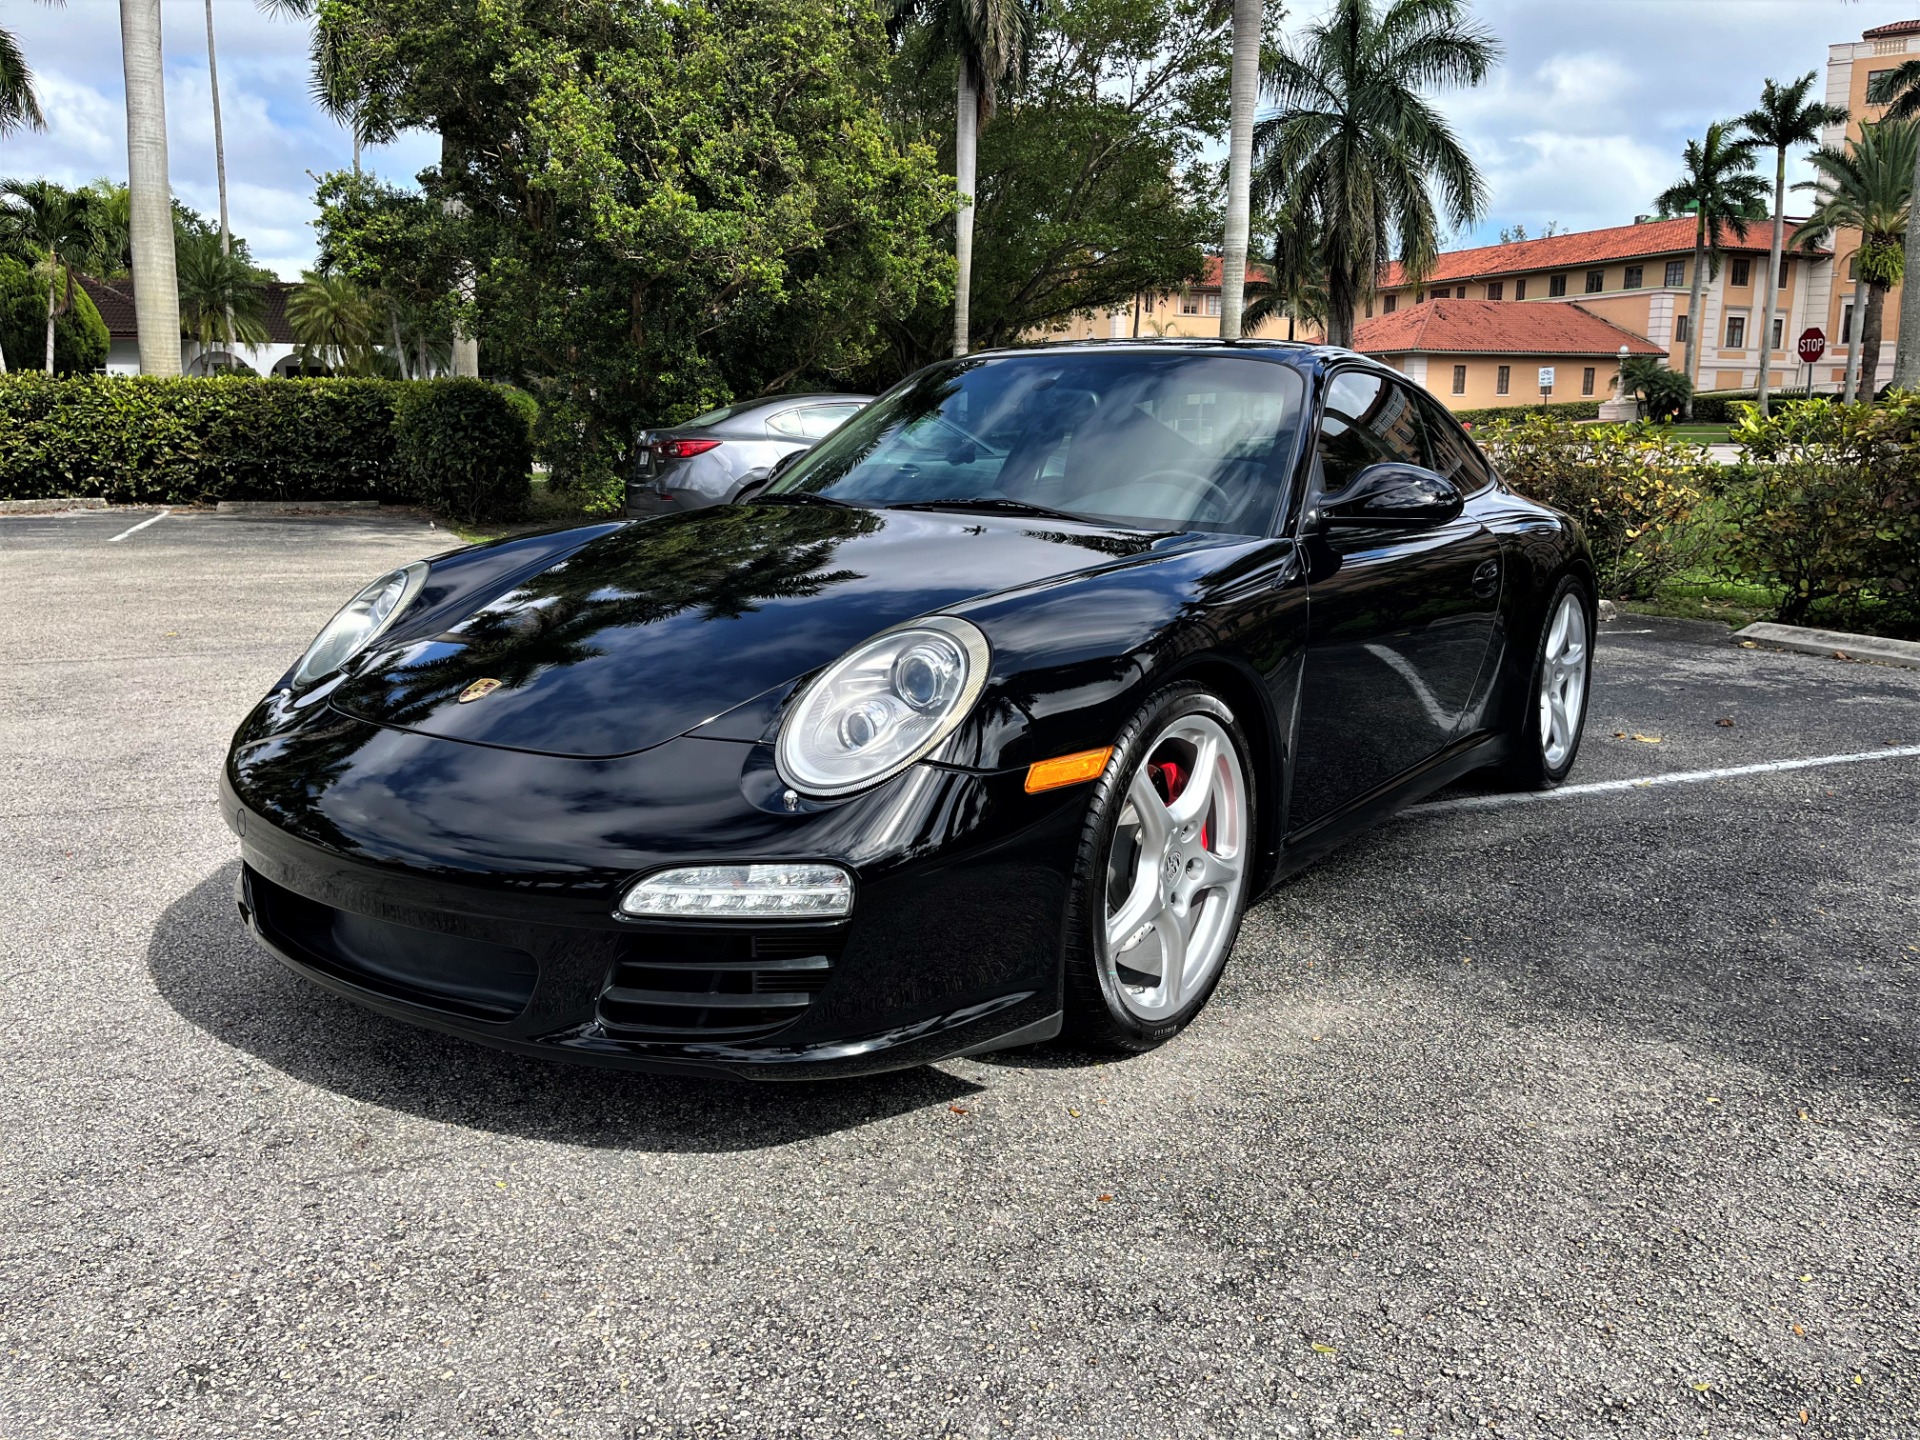 Used 2011 Porsche 911 Carrera S for sale Sold at The Gables Sports Cars in Miami FL 33146 3